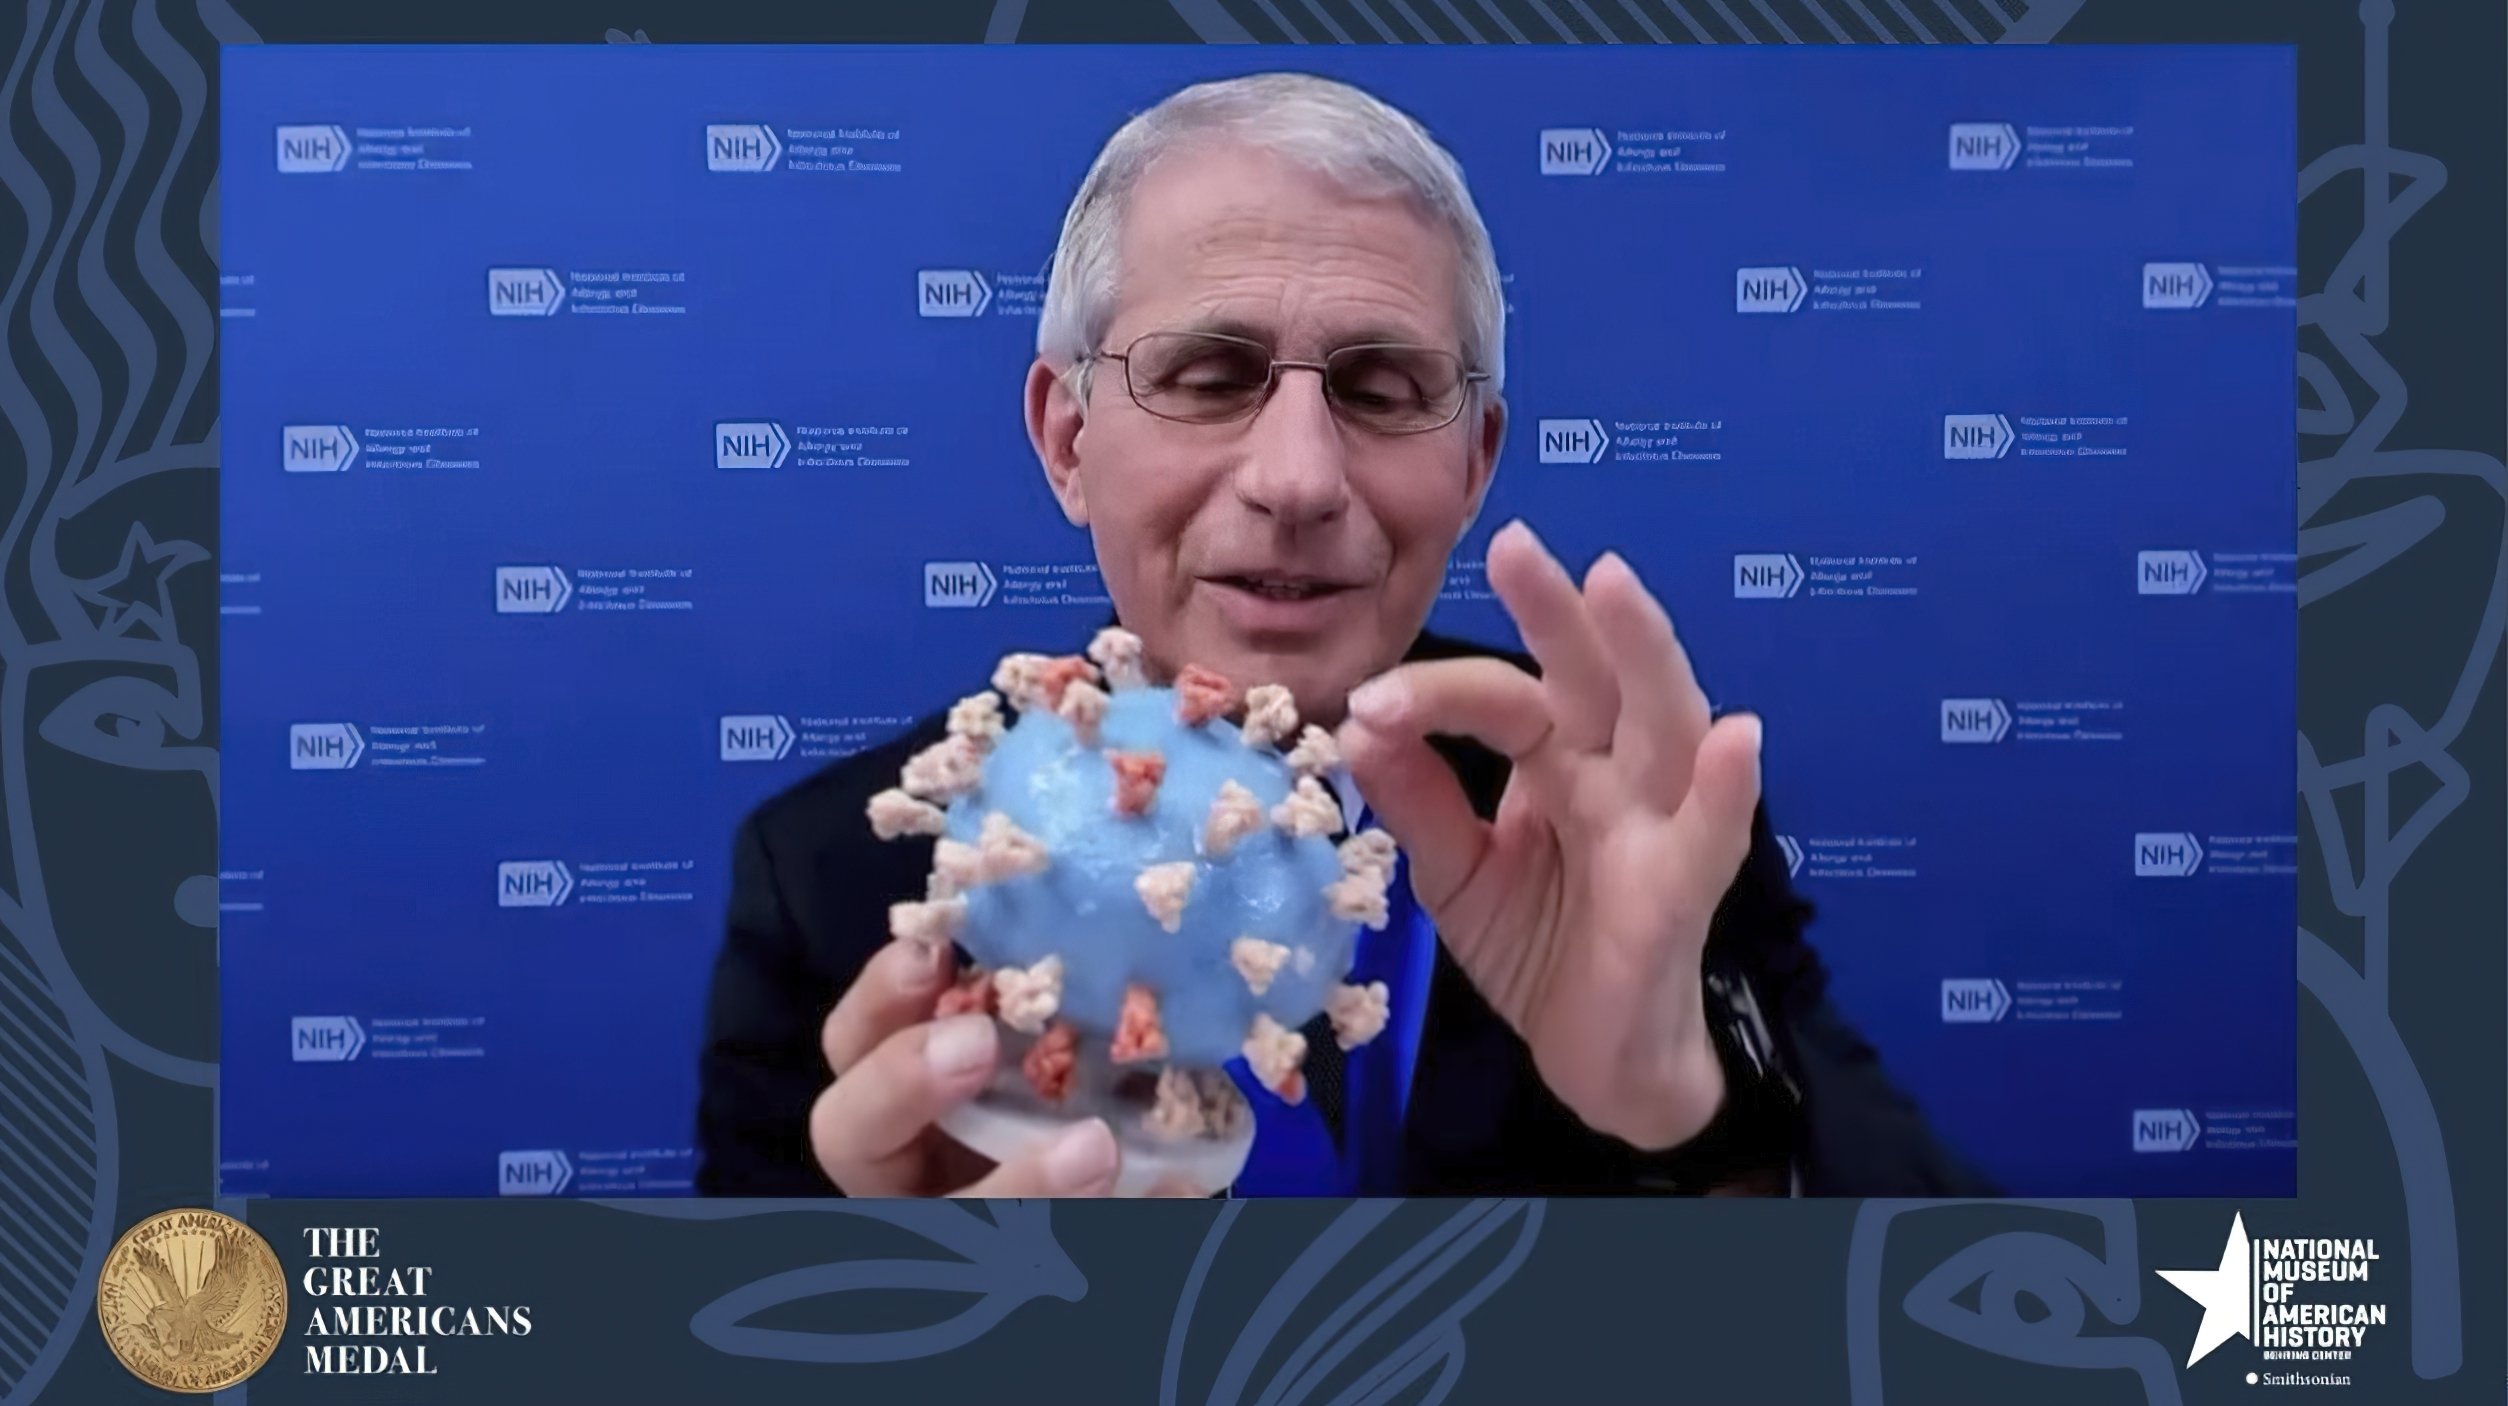 Fauci presents his personal virus model to the Smithsonian